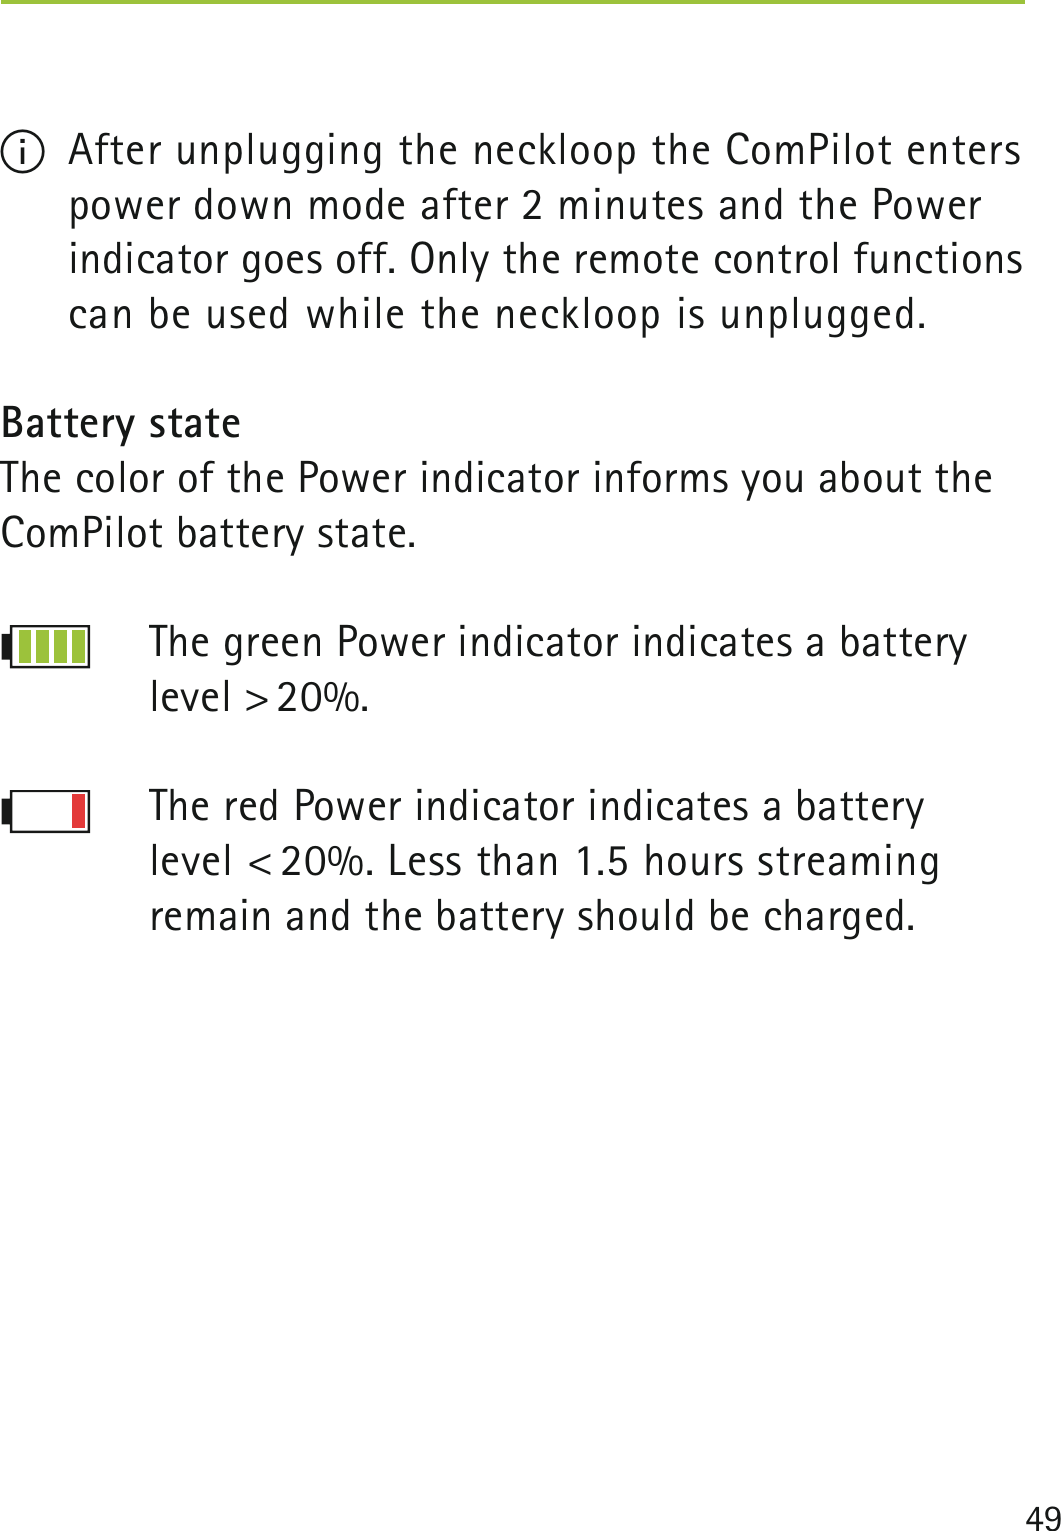 49I  After unplugging the neckloop the ComPilot enters power down mode after 2 minutes and the Power indicator goes off. Only the remote control functions can be used while the neckloop is unplugged.Battery stateThe color of the Power indicator informs you about the ComPilot battery state.The green Power indicator indicates a battery level &gt; 20%.The red Power indicator indicates a battery  level &lt; 20%. Less than 1.5 hours streaming  remain and the battery should be charged.  